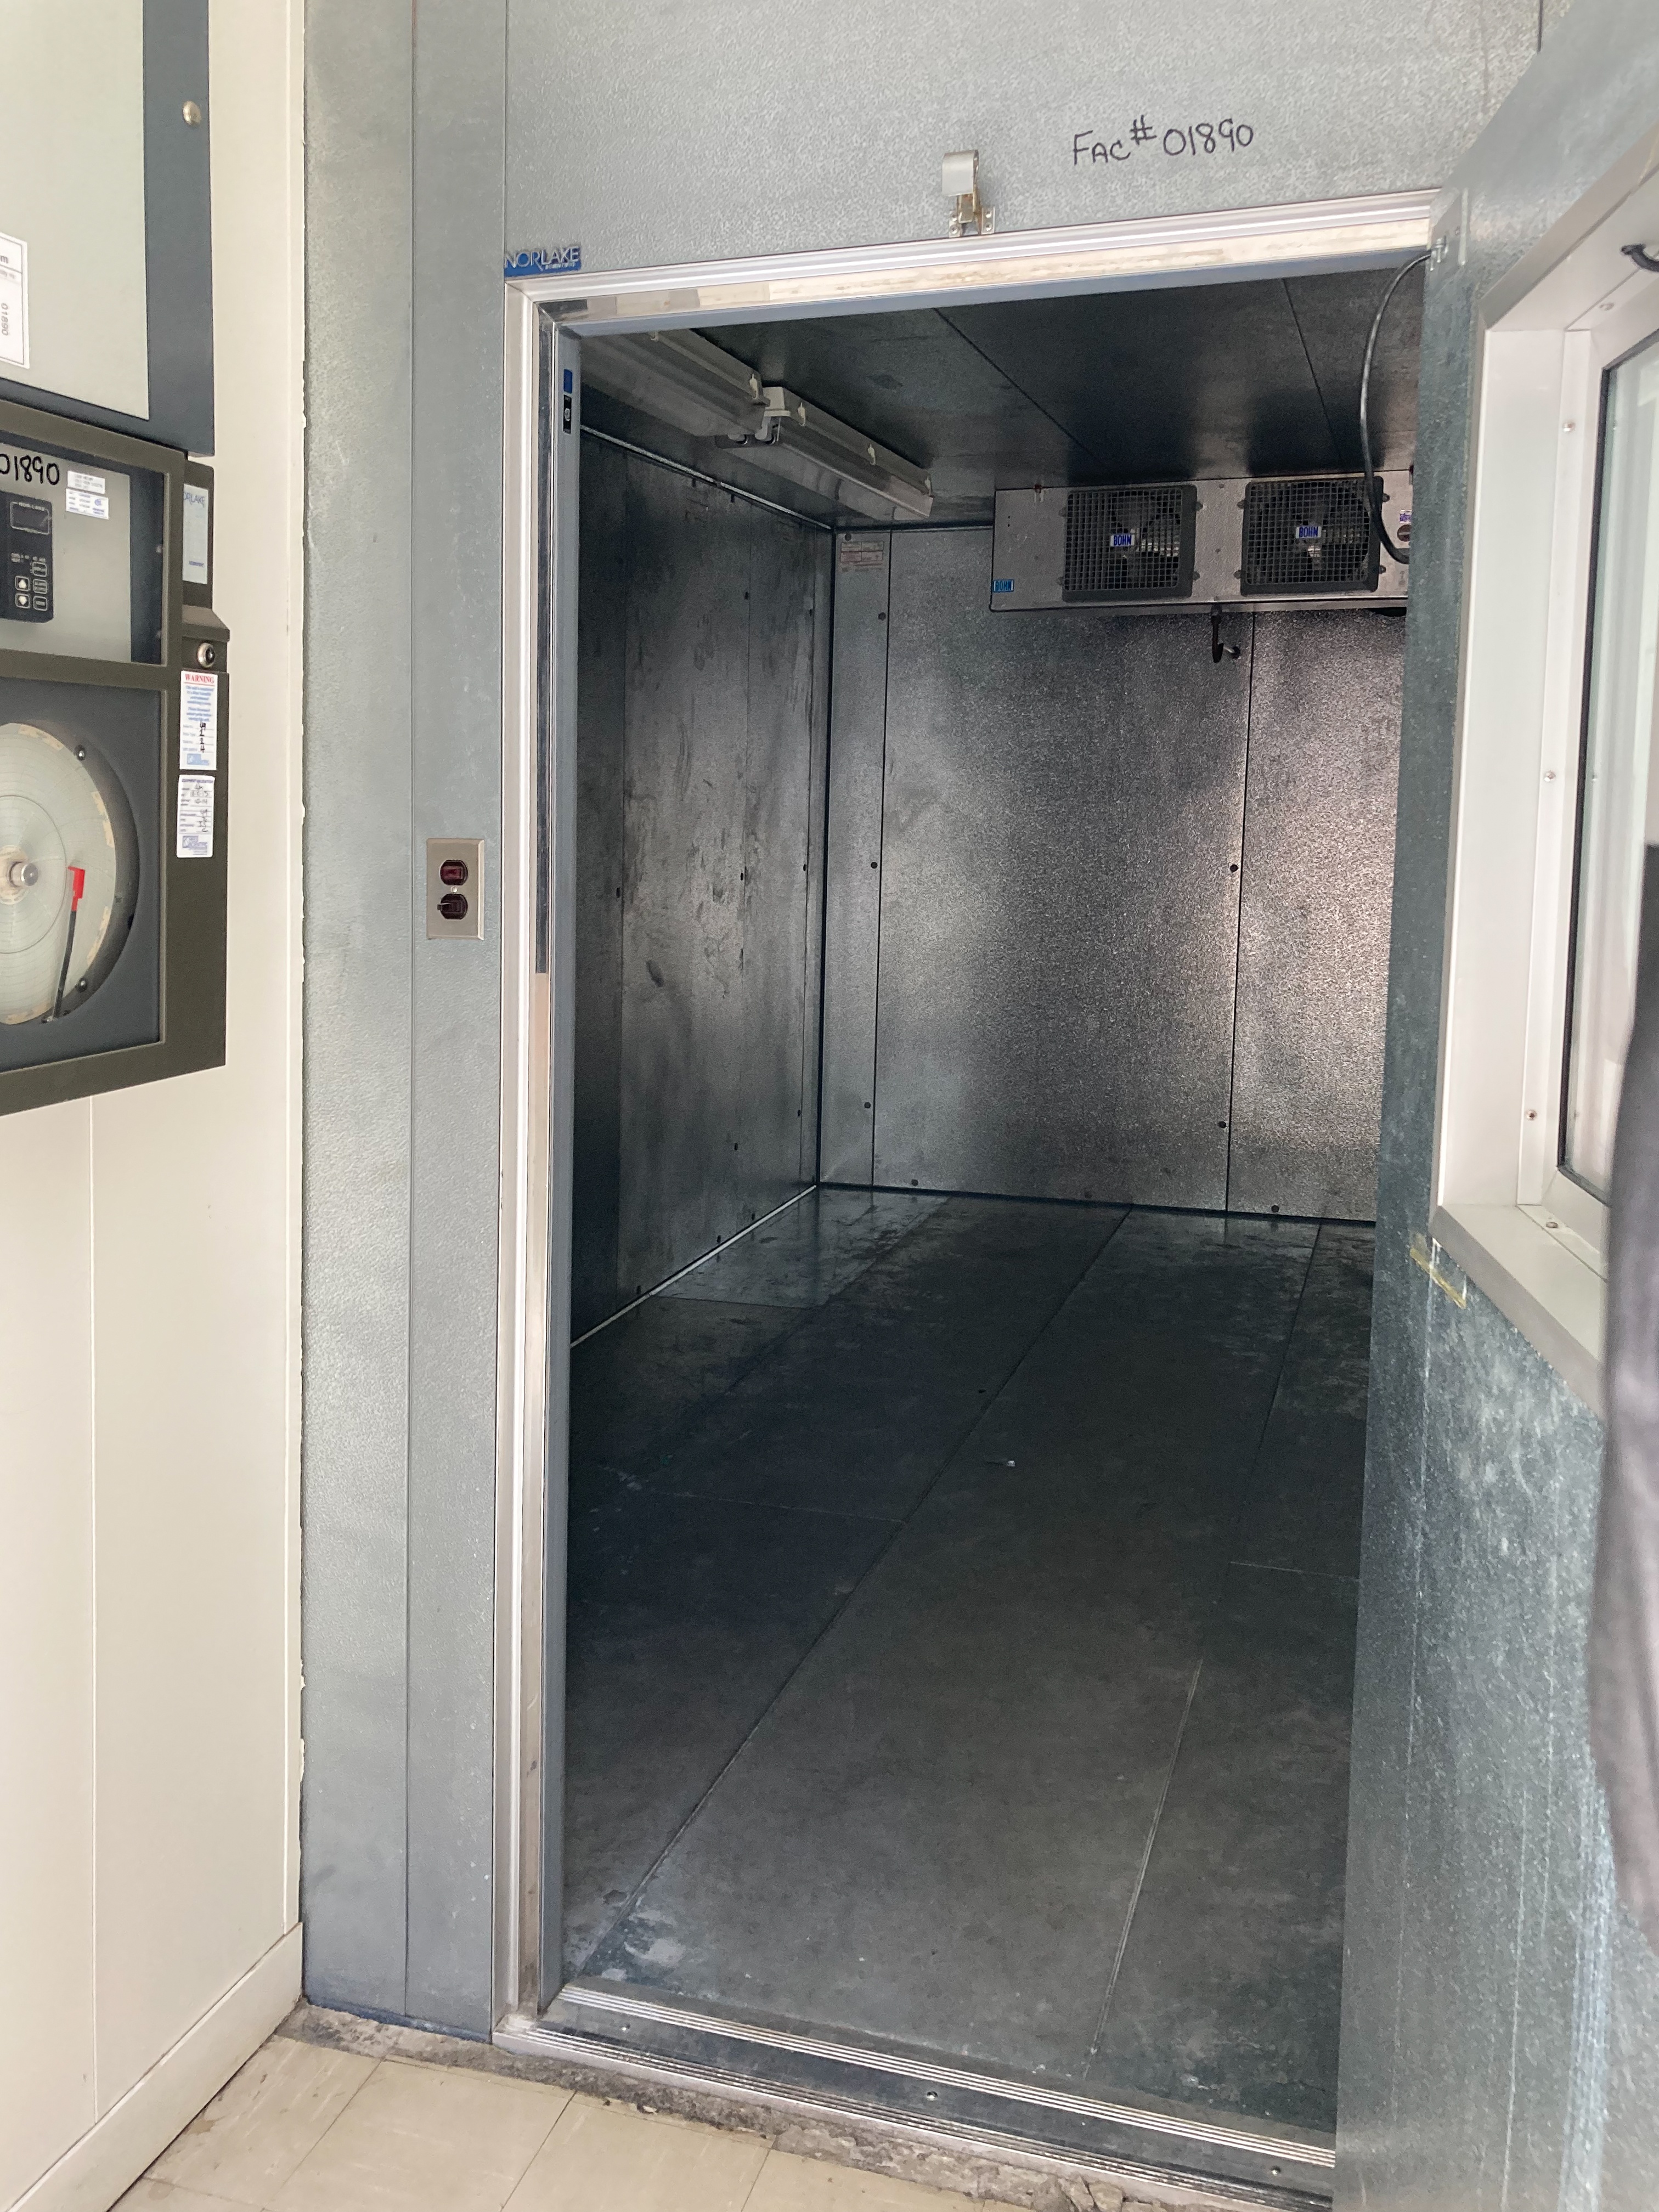 peering into the refrigerated room, the temperature controls and monitoring device can be seen to the left outside the room.